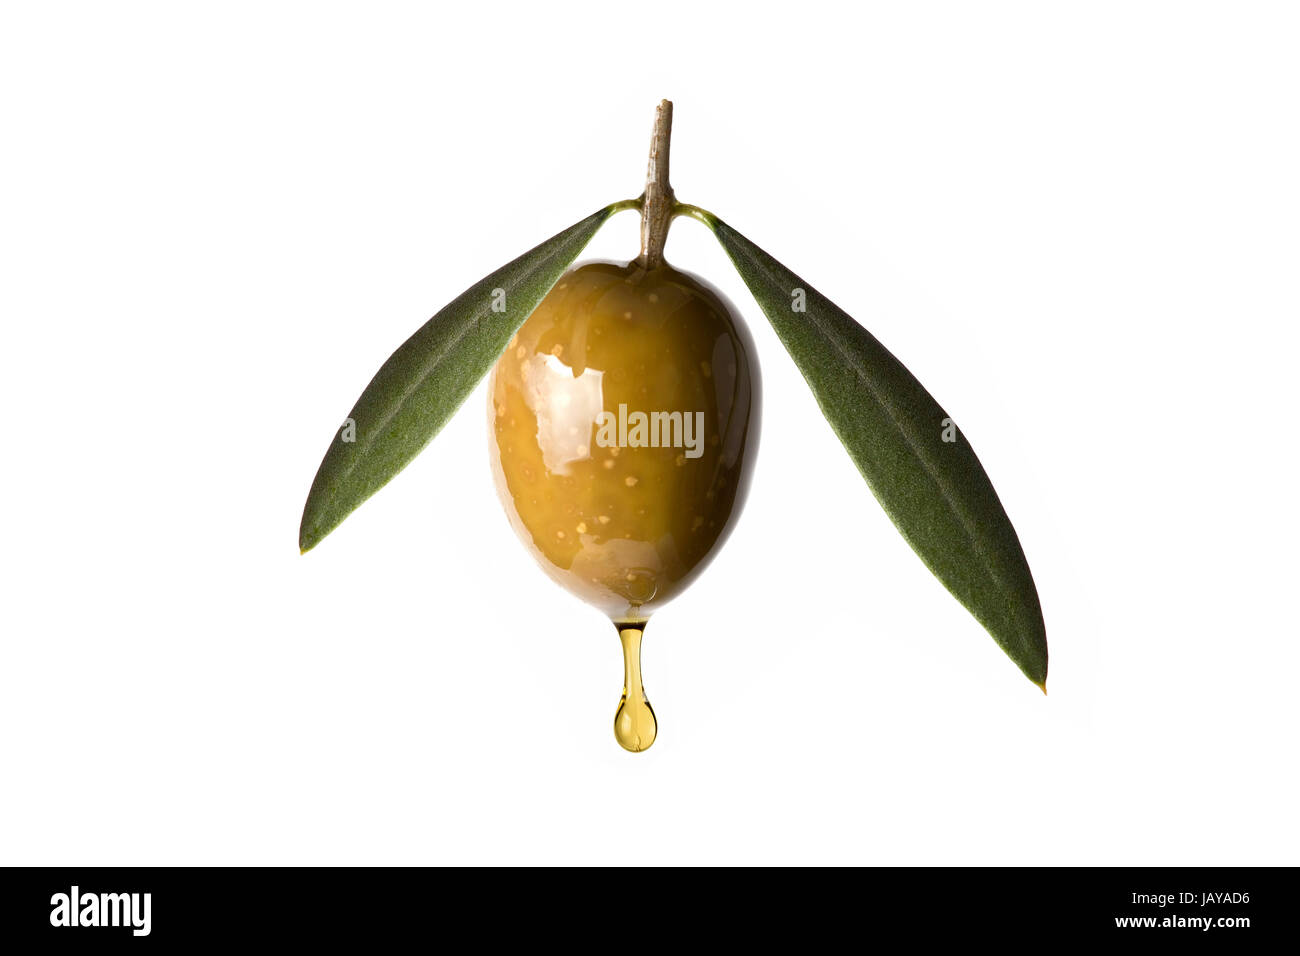 A drop of olive oil falling from one green olive isolated on a white background Stock Photo